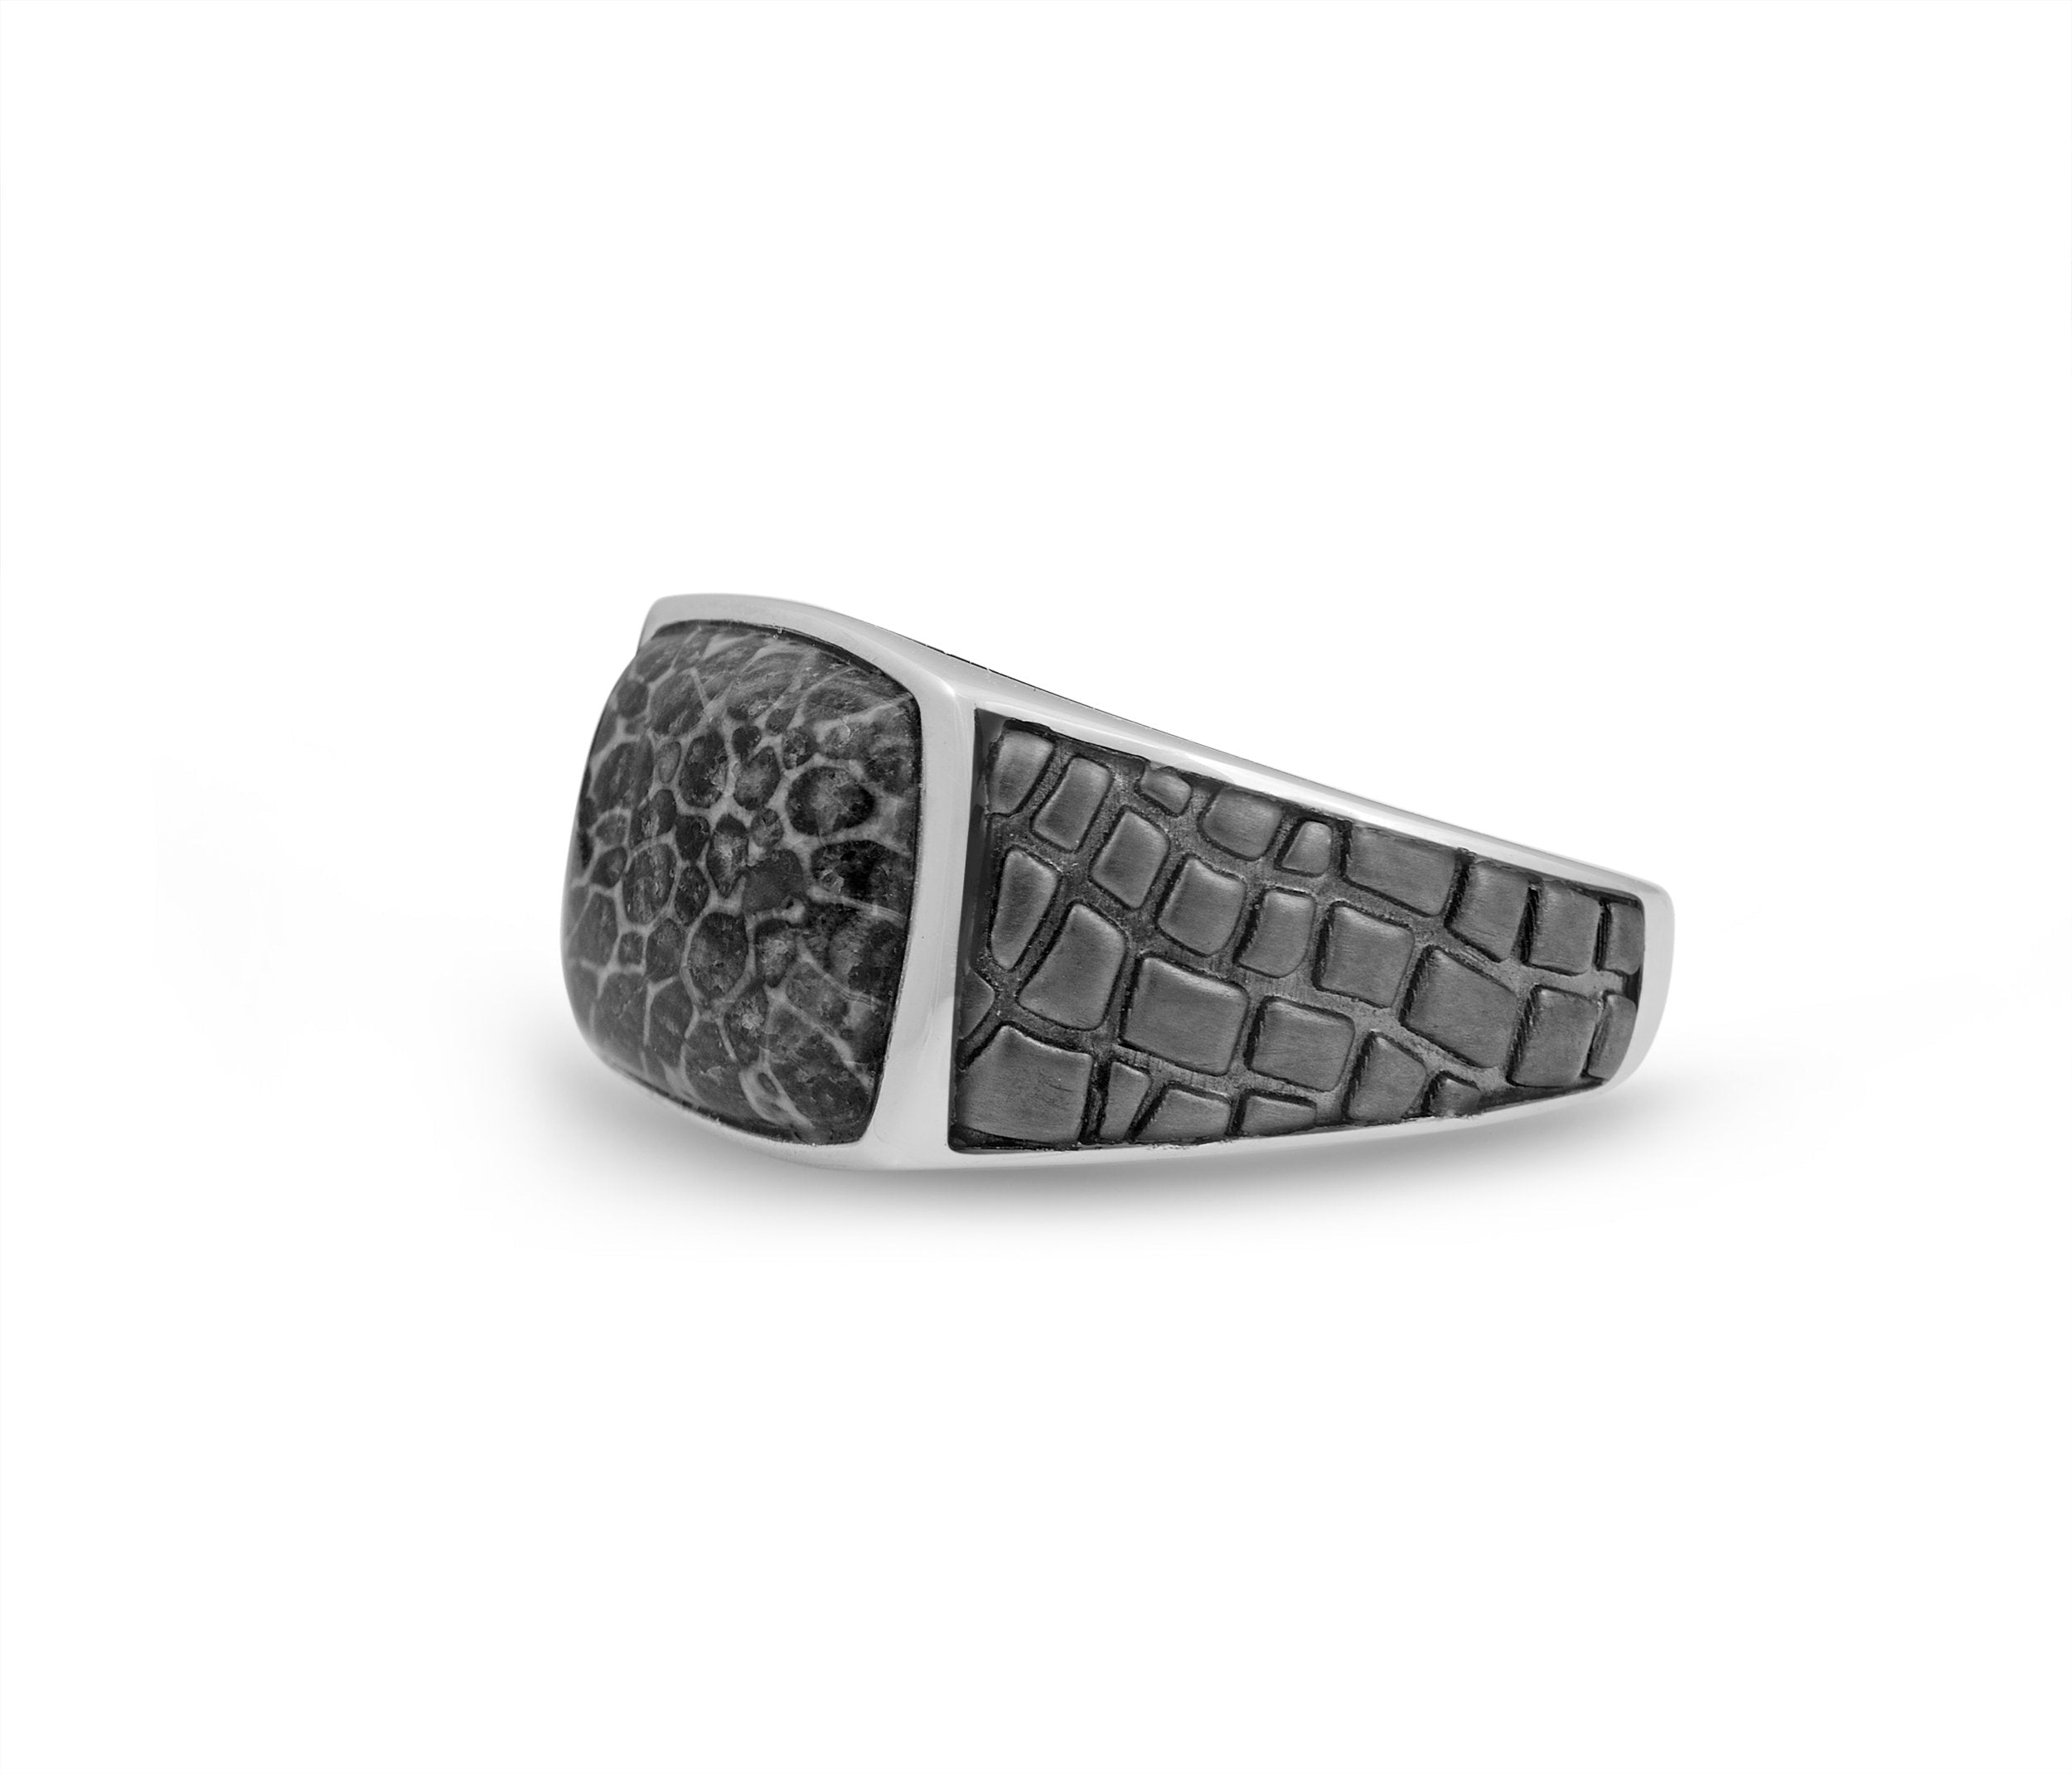 Fossil Agate Stone Signet Ring in Black Rhodium Plated Sterling Silver